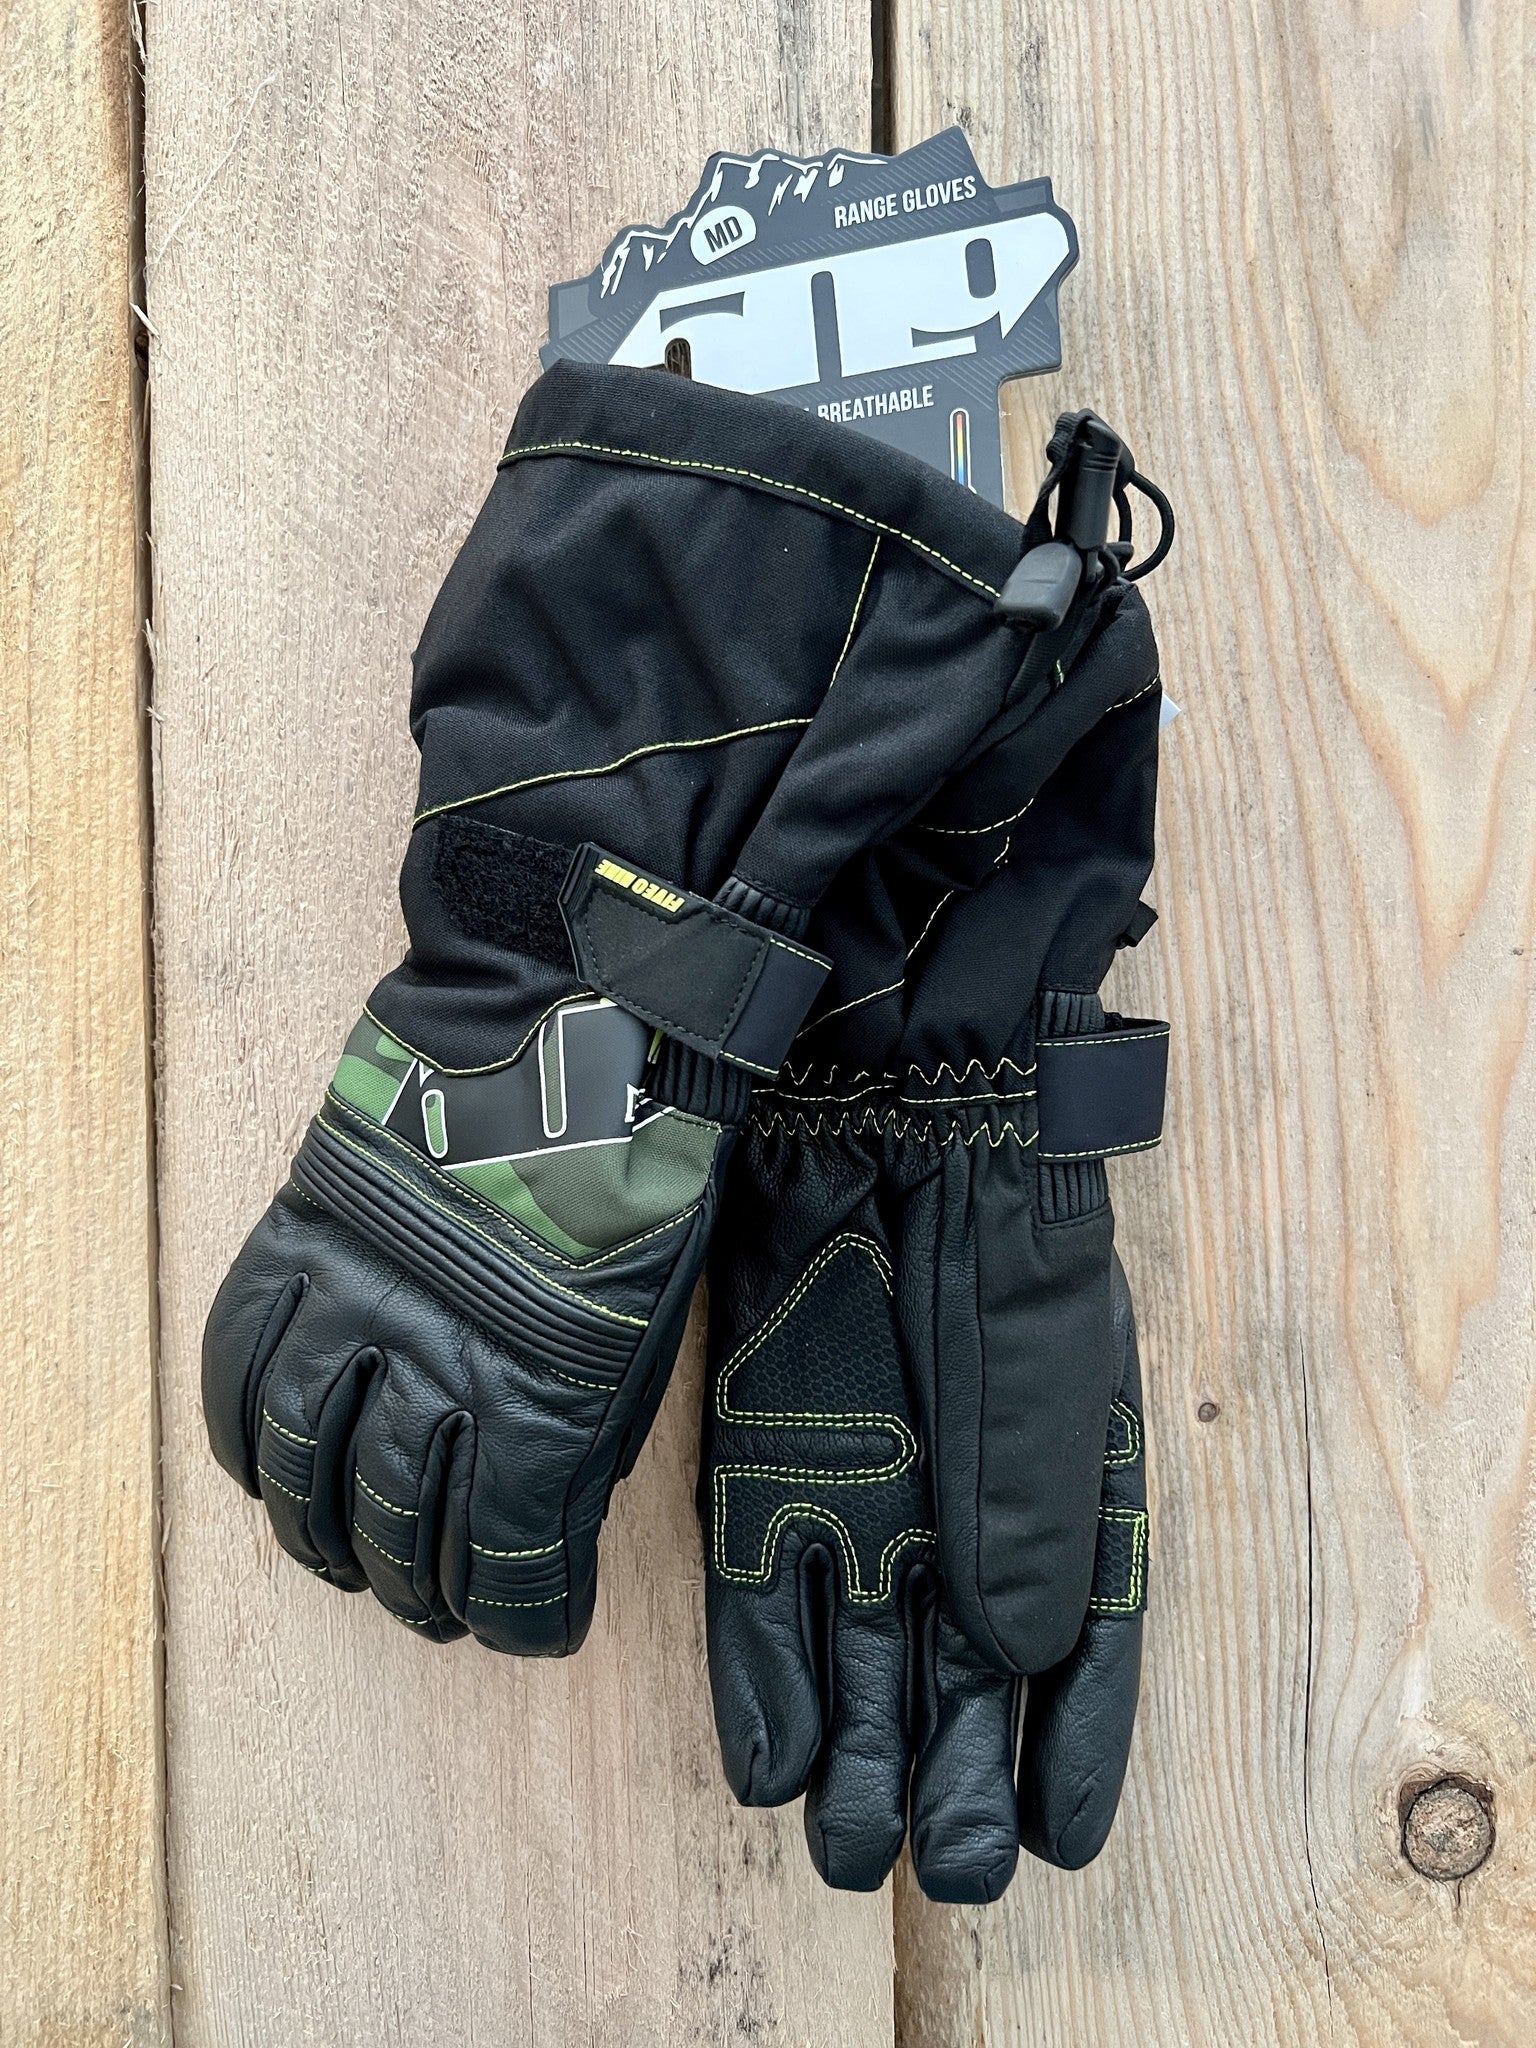 509 Range Insulated Gloves (Non-Current)